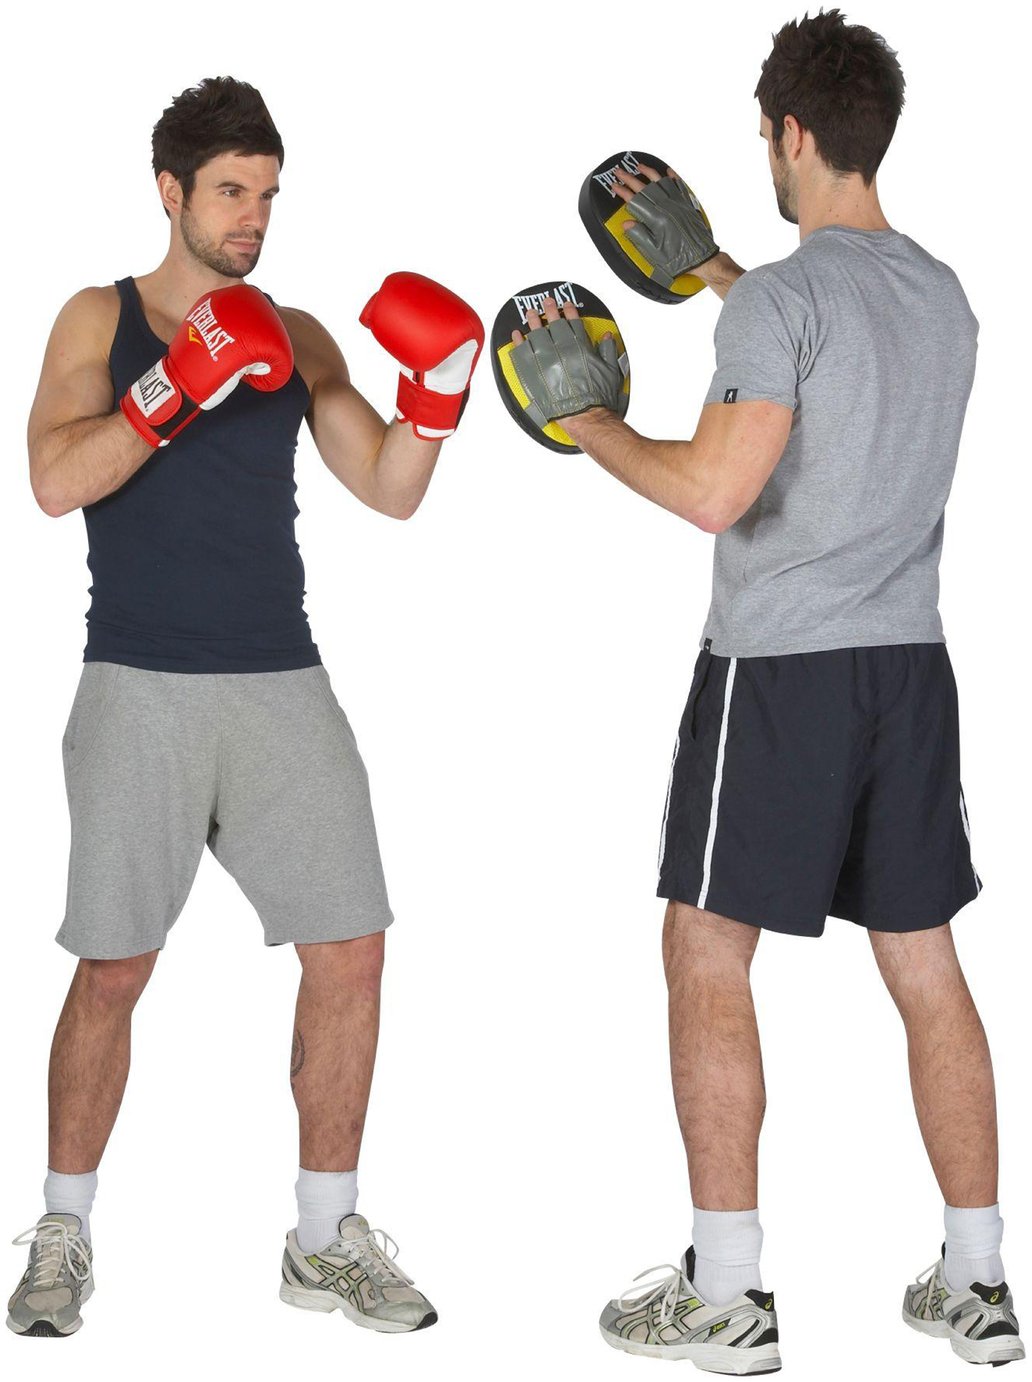 Everlast Hook and Jab Boxing Pads Review